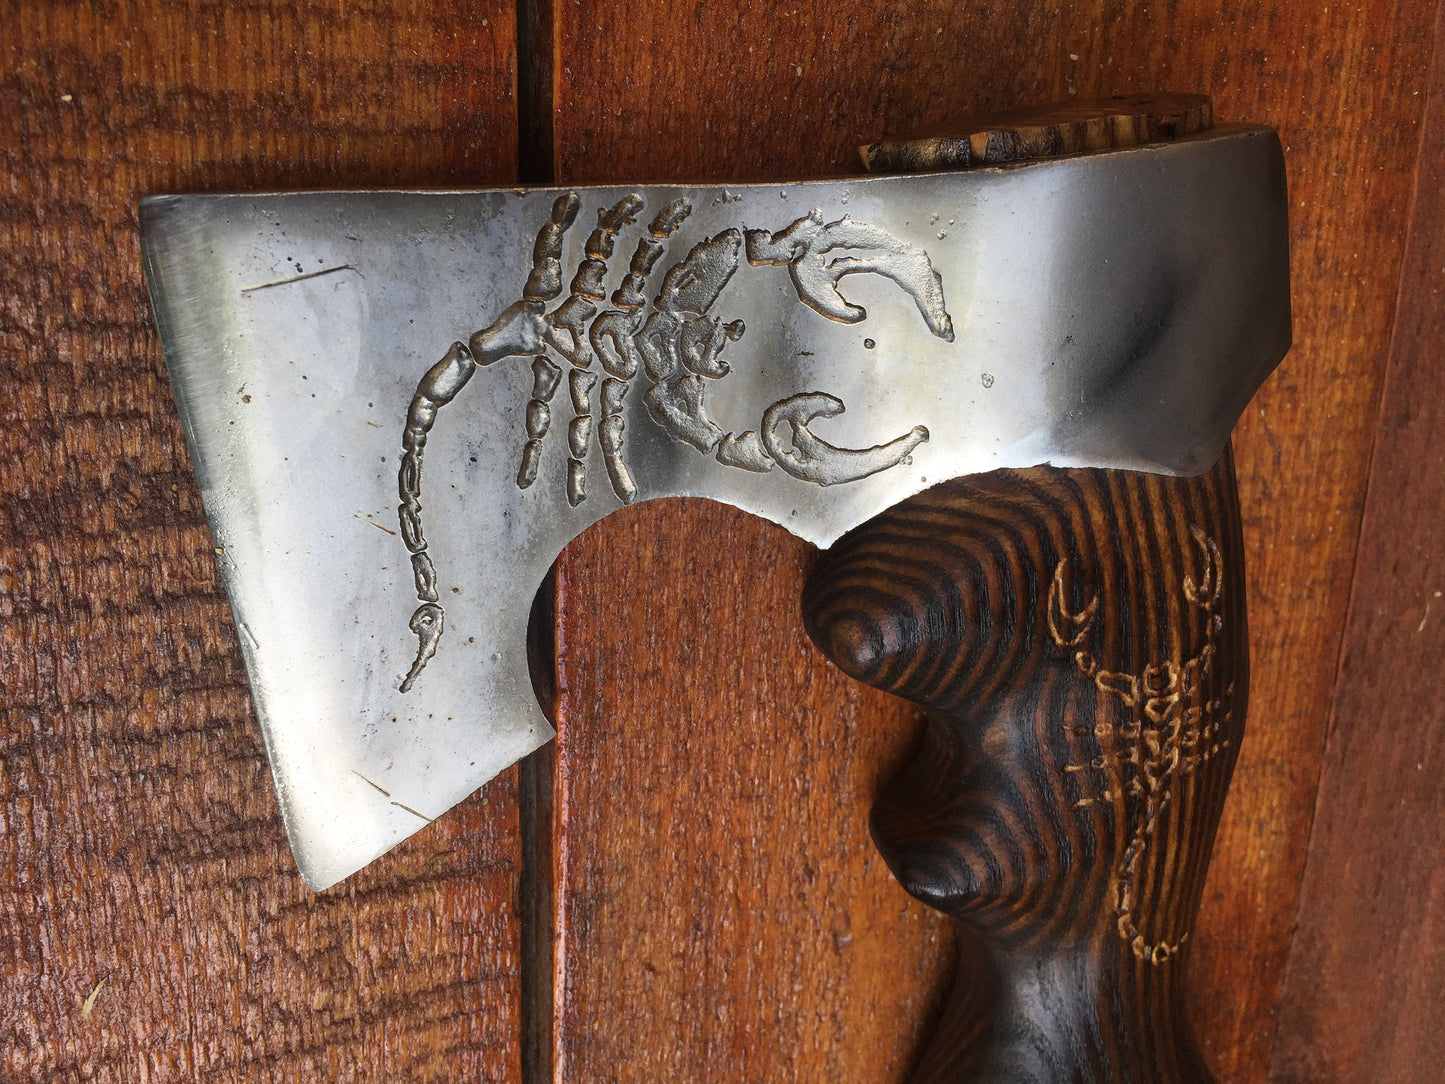 Axe in engraved wooden box, personalized gift, gift for men, viking axe, his birthday gift, tomahawk, axe, hatchet, viking, iron anniversary